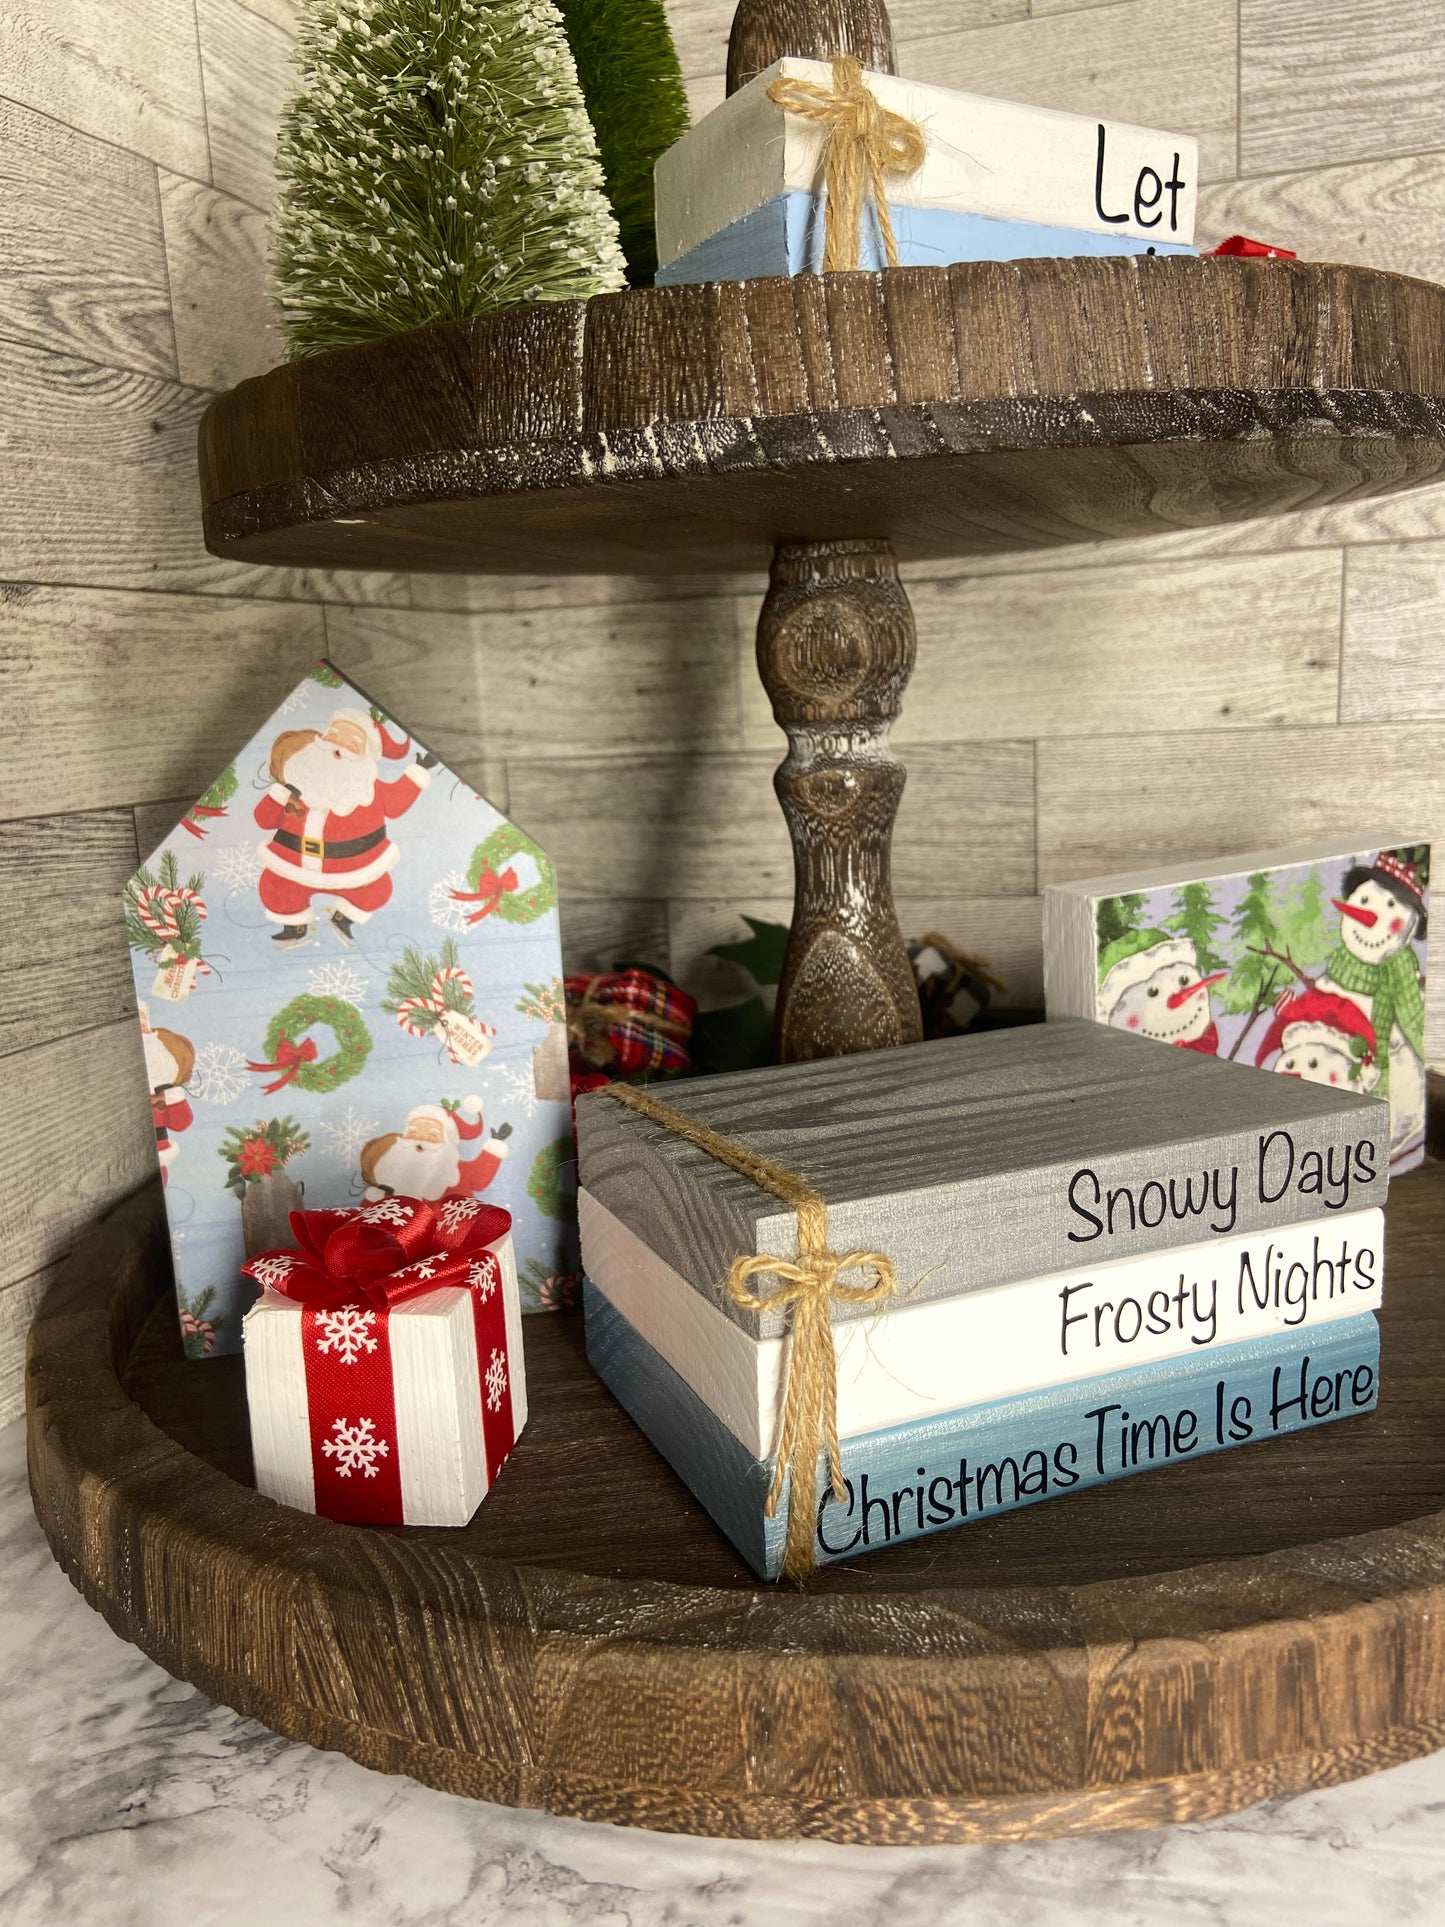 Snowy Days Frosty Nights Christmas Time Is Here - Large Christmas Tiered Tray Book